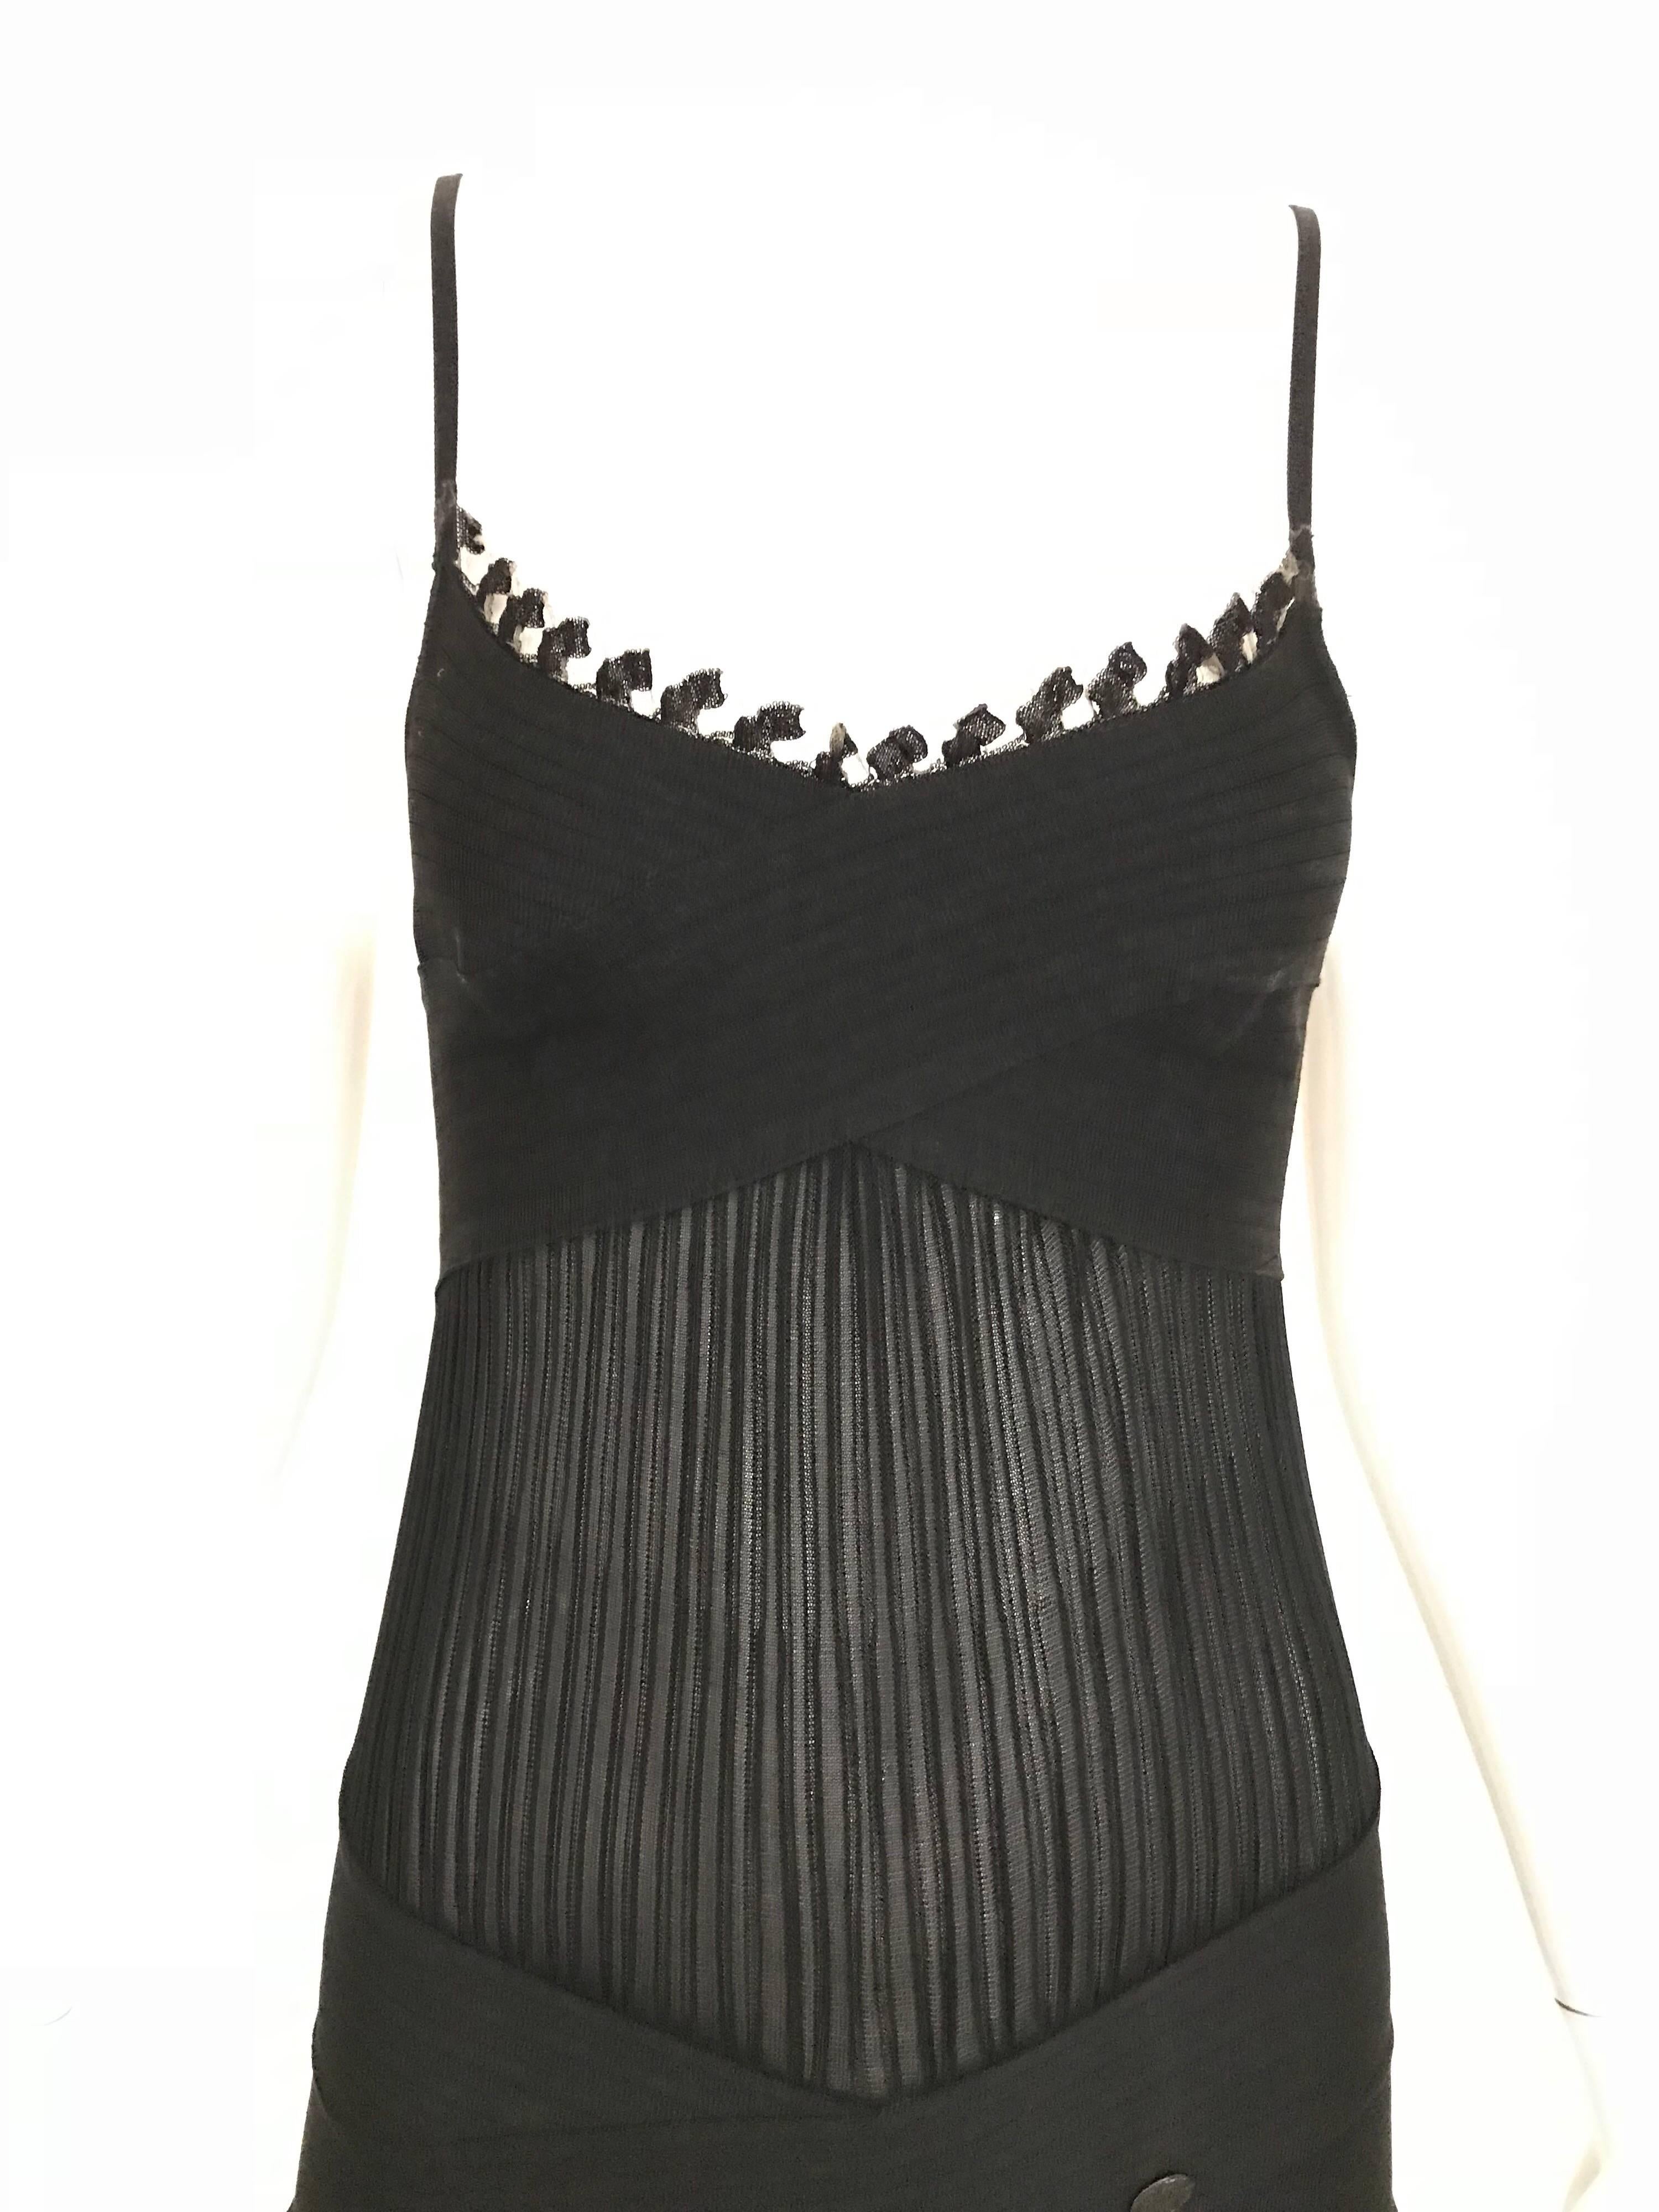 Sexy CHANEL spaghetti strap knit cocktail dress.  
Excellent condition.  Fit size Small / 2 or 4 ( dress is stretchy)
Measurement:
Bust: 28' stretch up to 32